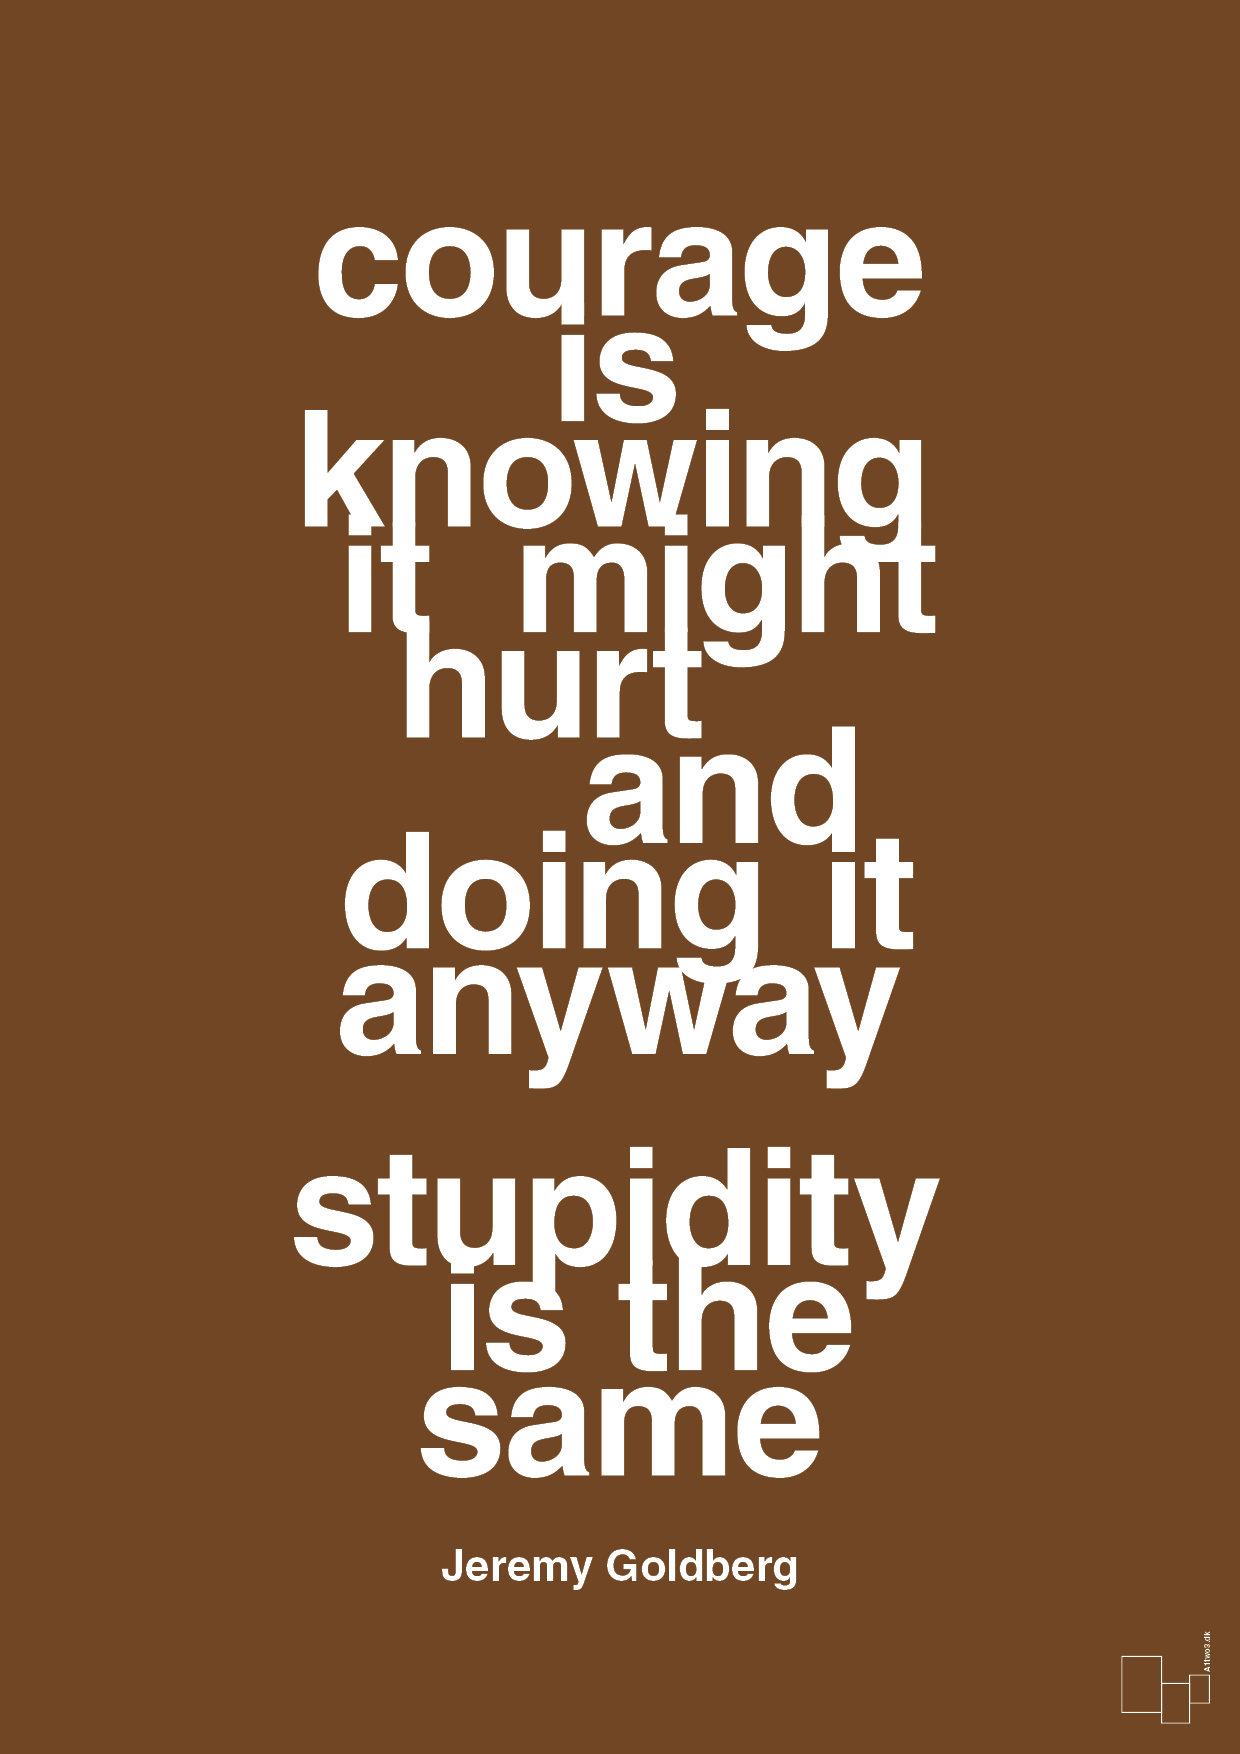 courage is knowing it might hurt and doing it anyway stupidity is the same - Plakat med Citater i Dark Brown